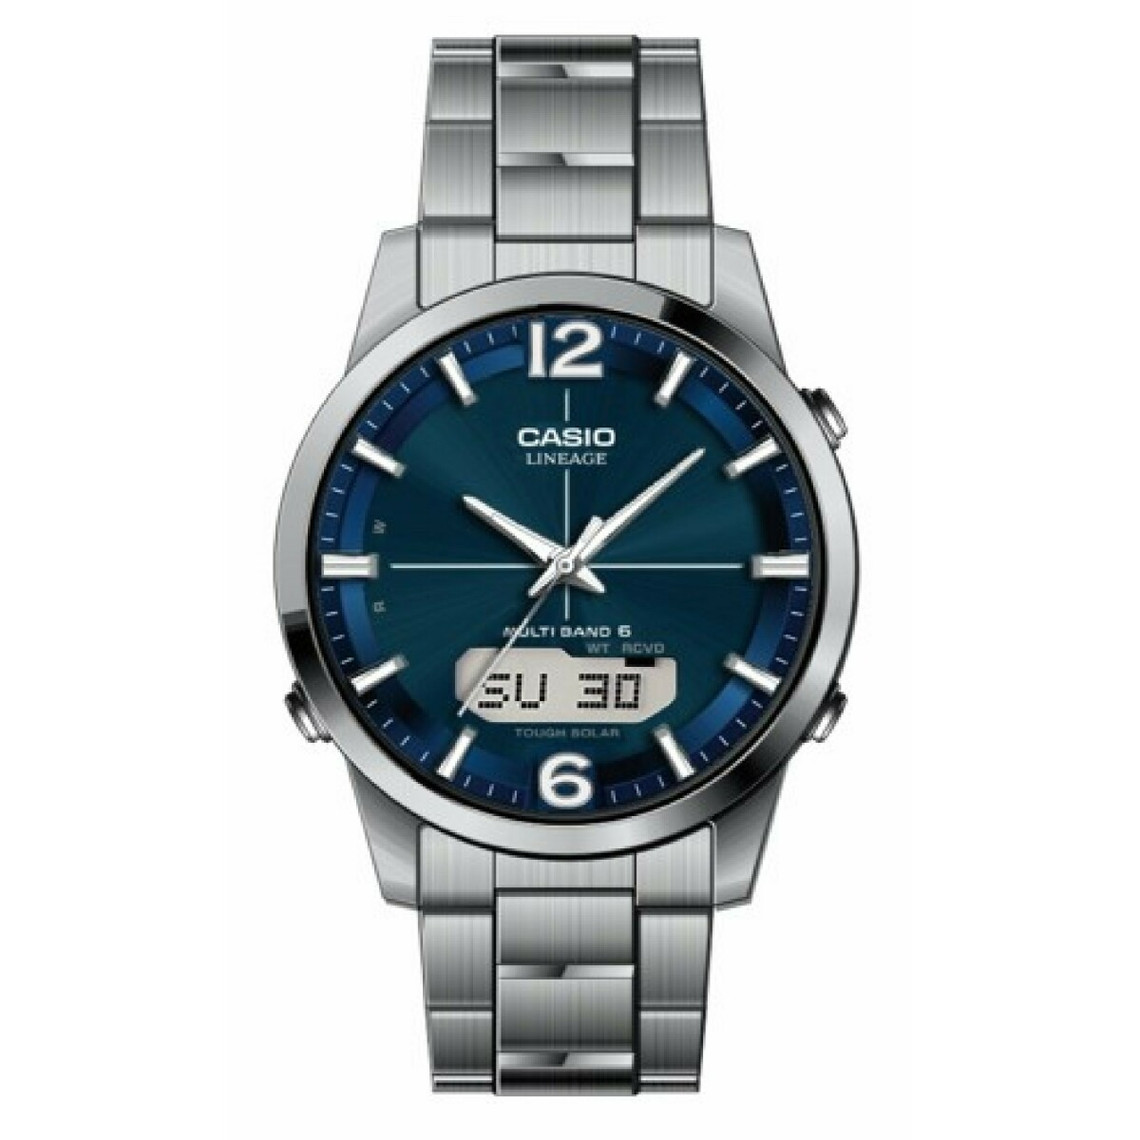 Montre Homme LCW-M170TD-2AER - CASIO LINEAGE